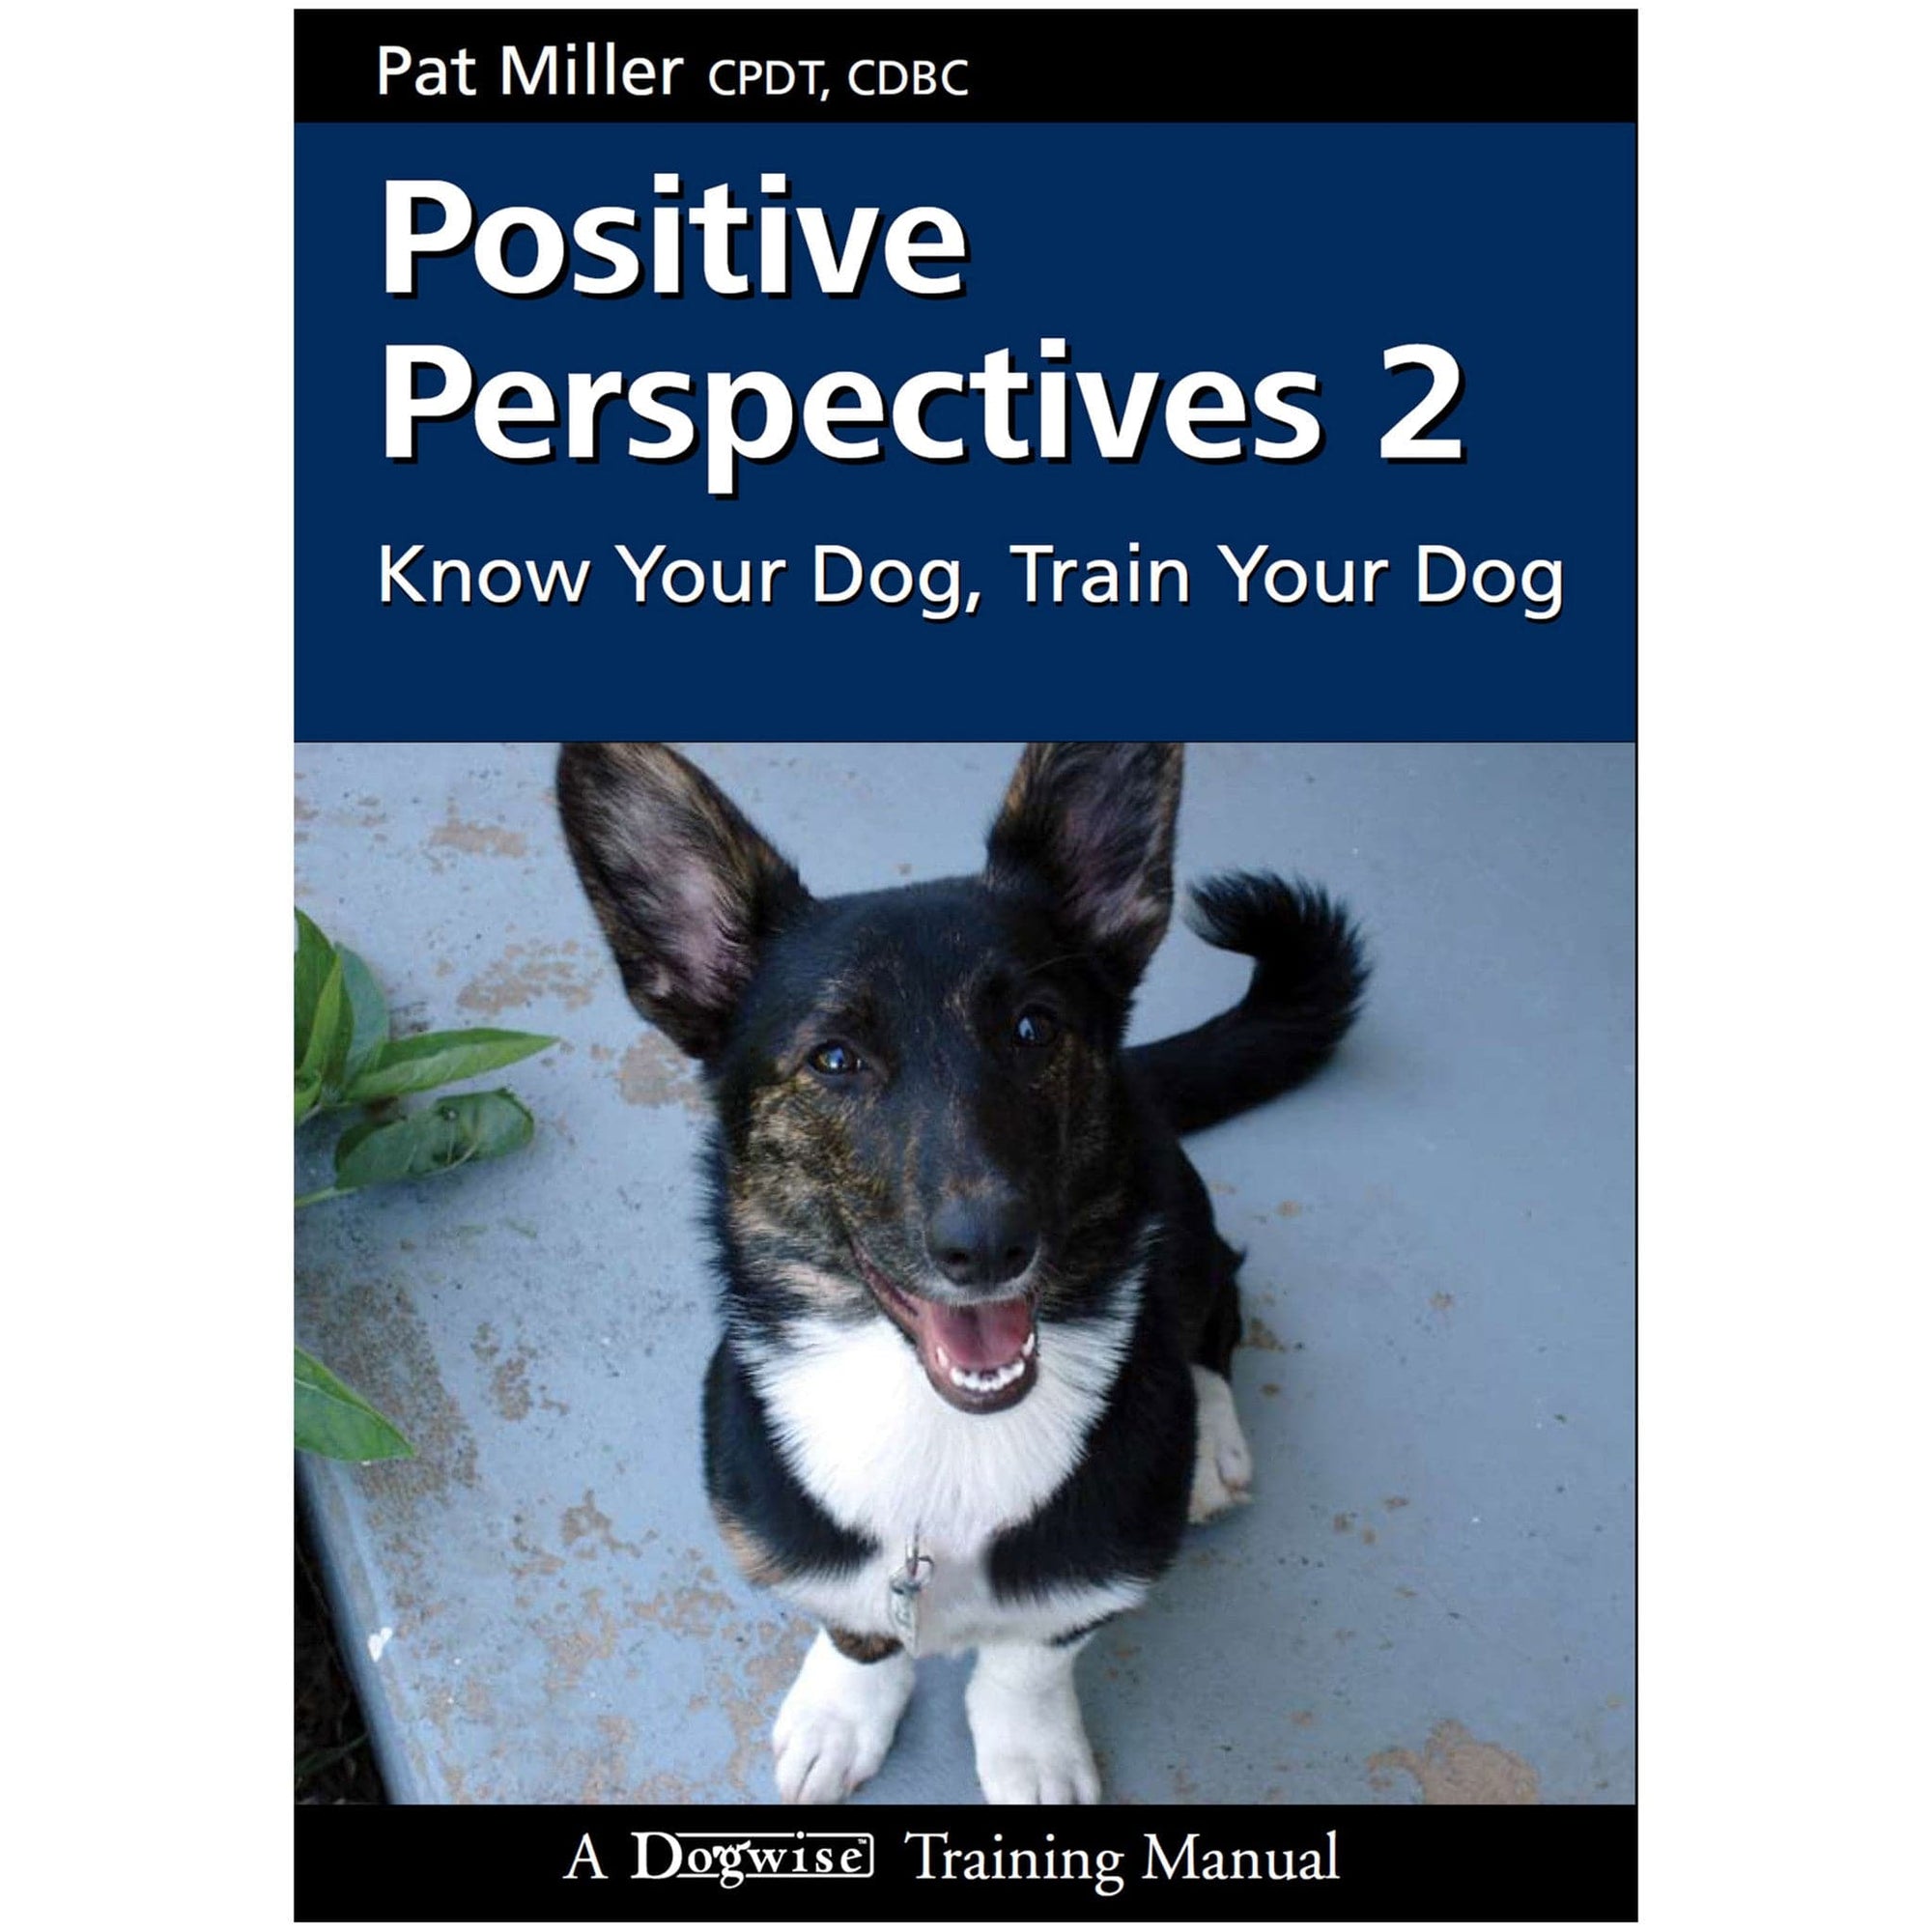 E-BOOK Positive Perspectives 2: Know Your Dog, Train Your Dog by Pat Miller